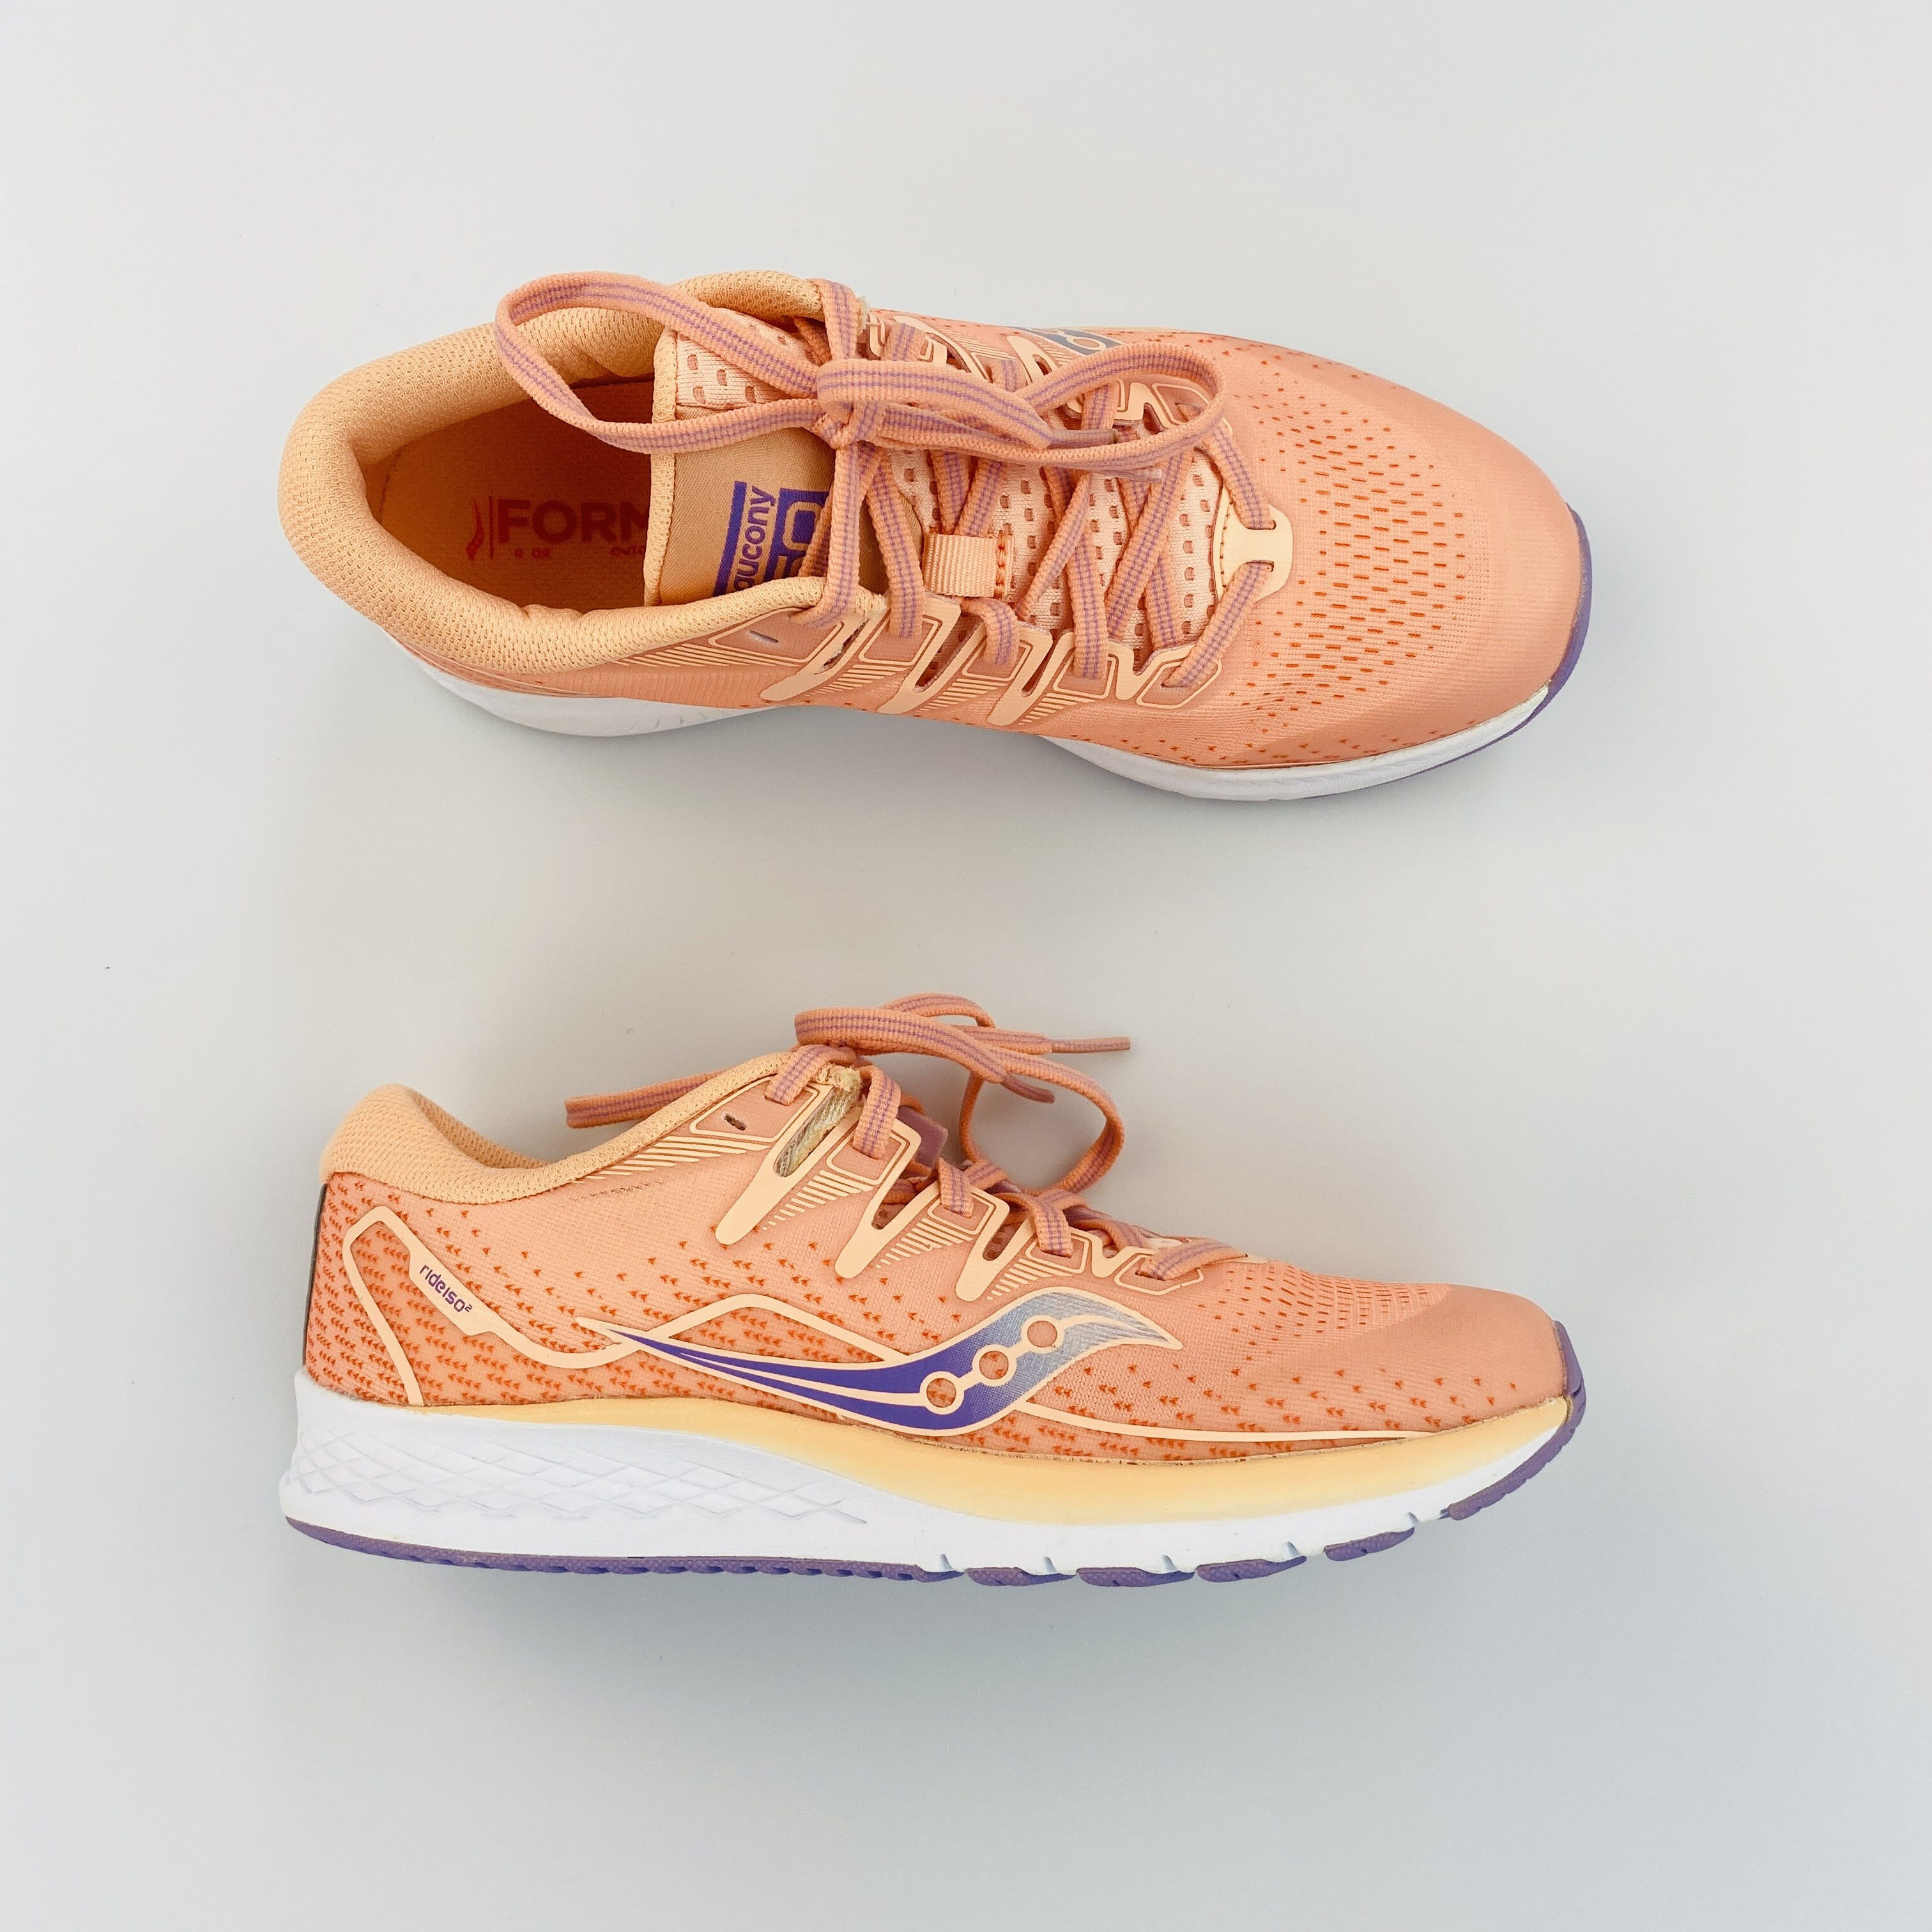 Saucony Ride Iso 2 - Seconde main Chaussures running femme - Rose - 36.5 | Hardloop